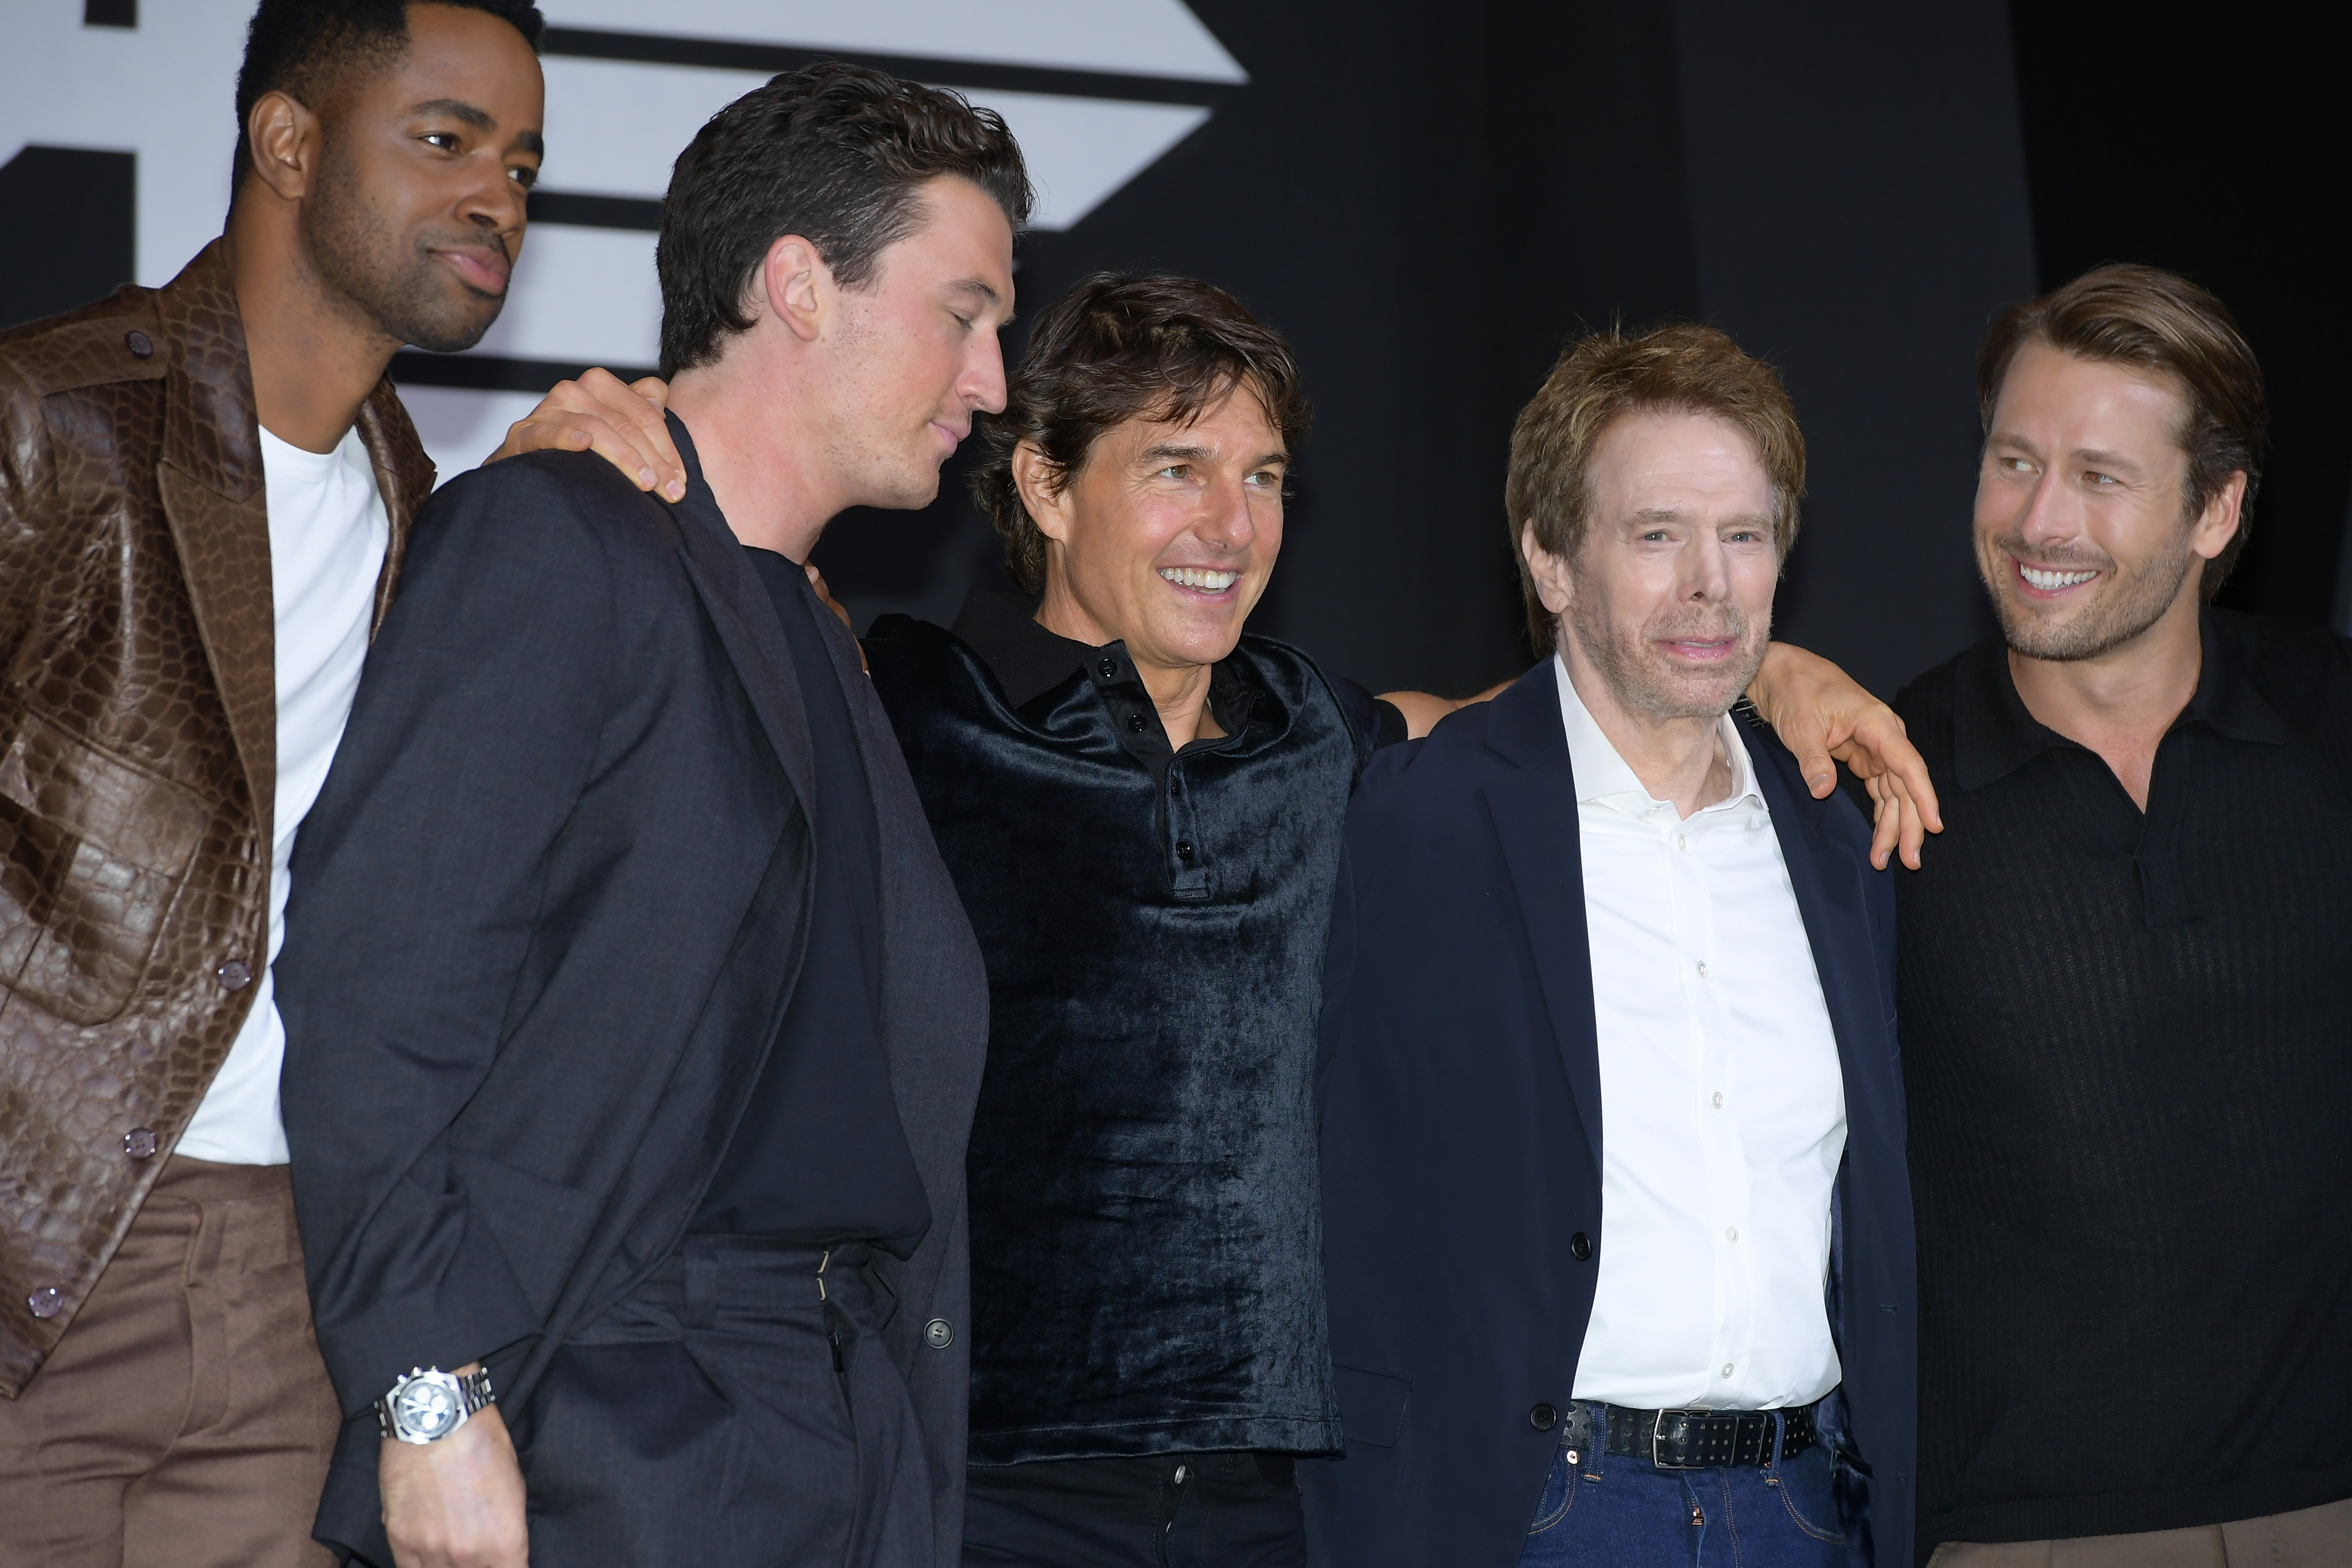 Jay Ellis, Miles Teller, Tom Cruise, Jerry Bruckheimer, and Glen Powell during a press conference for "Top Gun: Maverick" at Lotte Hotel World on June 20, 2022, in Seoul, South Korea | Source: Getty Images